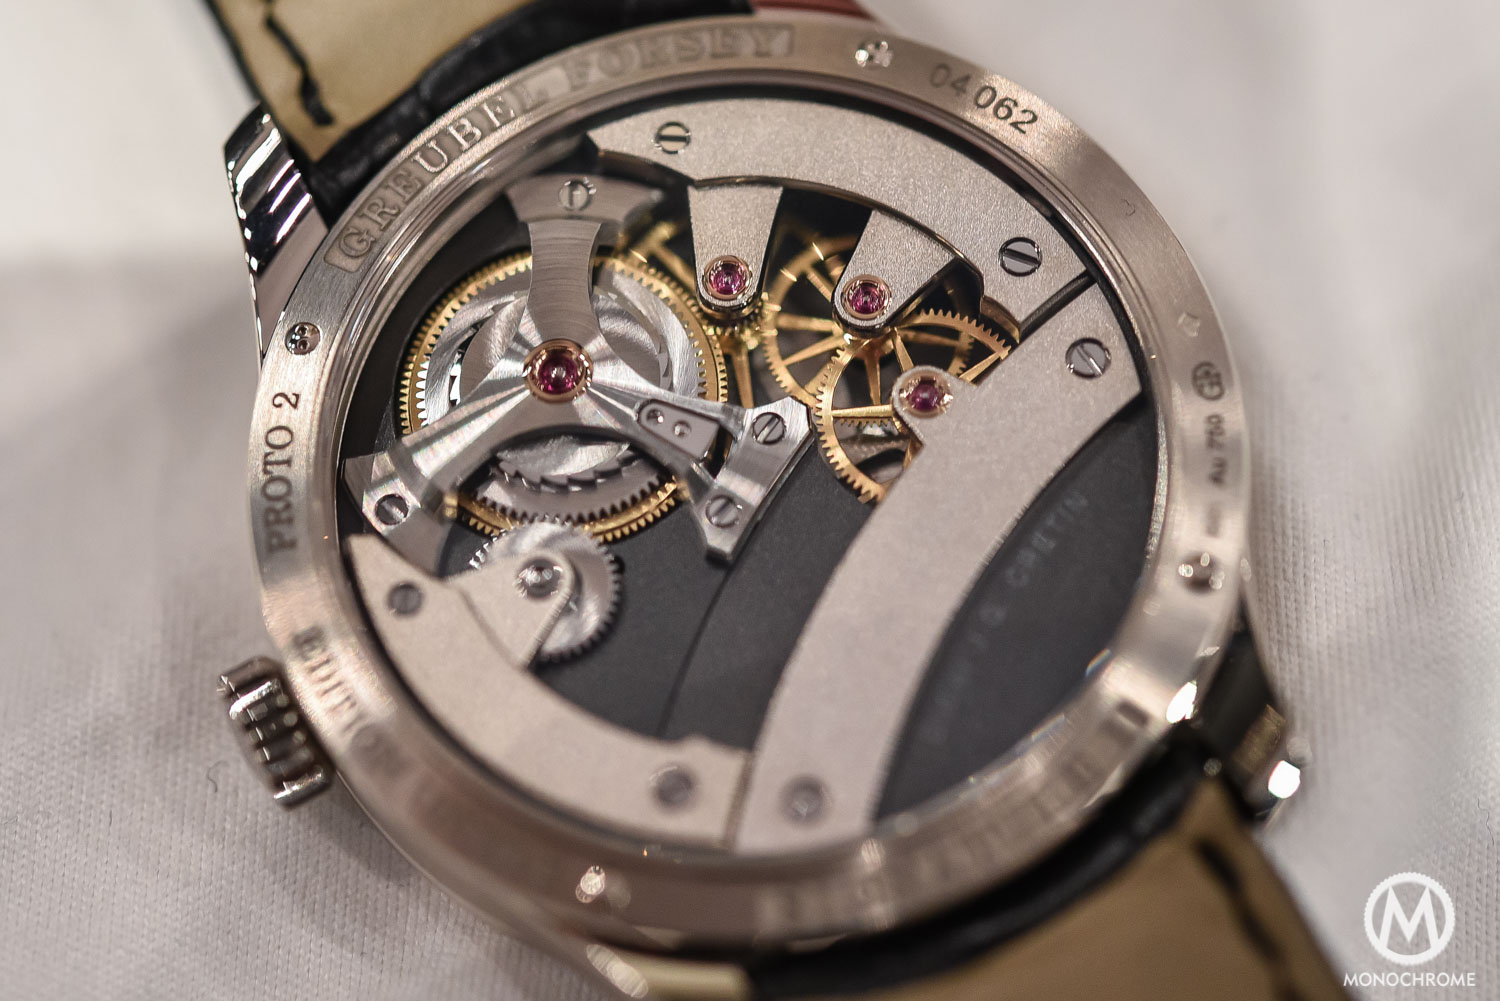 Greubel Forsey Signature 1 - Stainless steel entry level - SIHH 2016 - movement